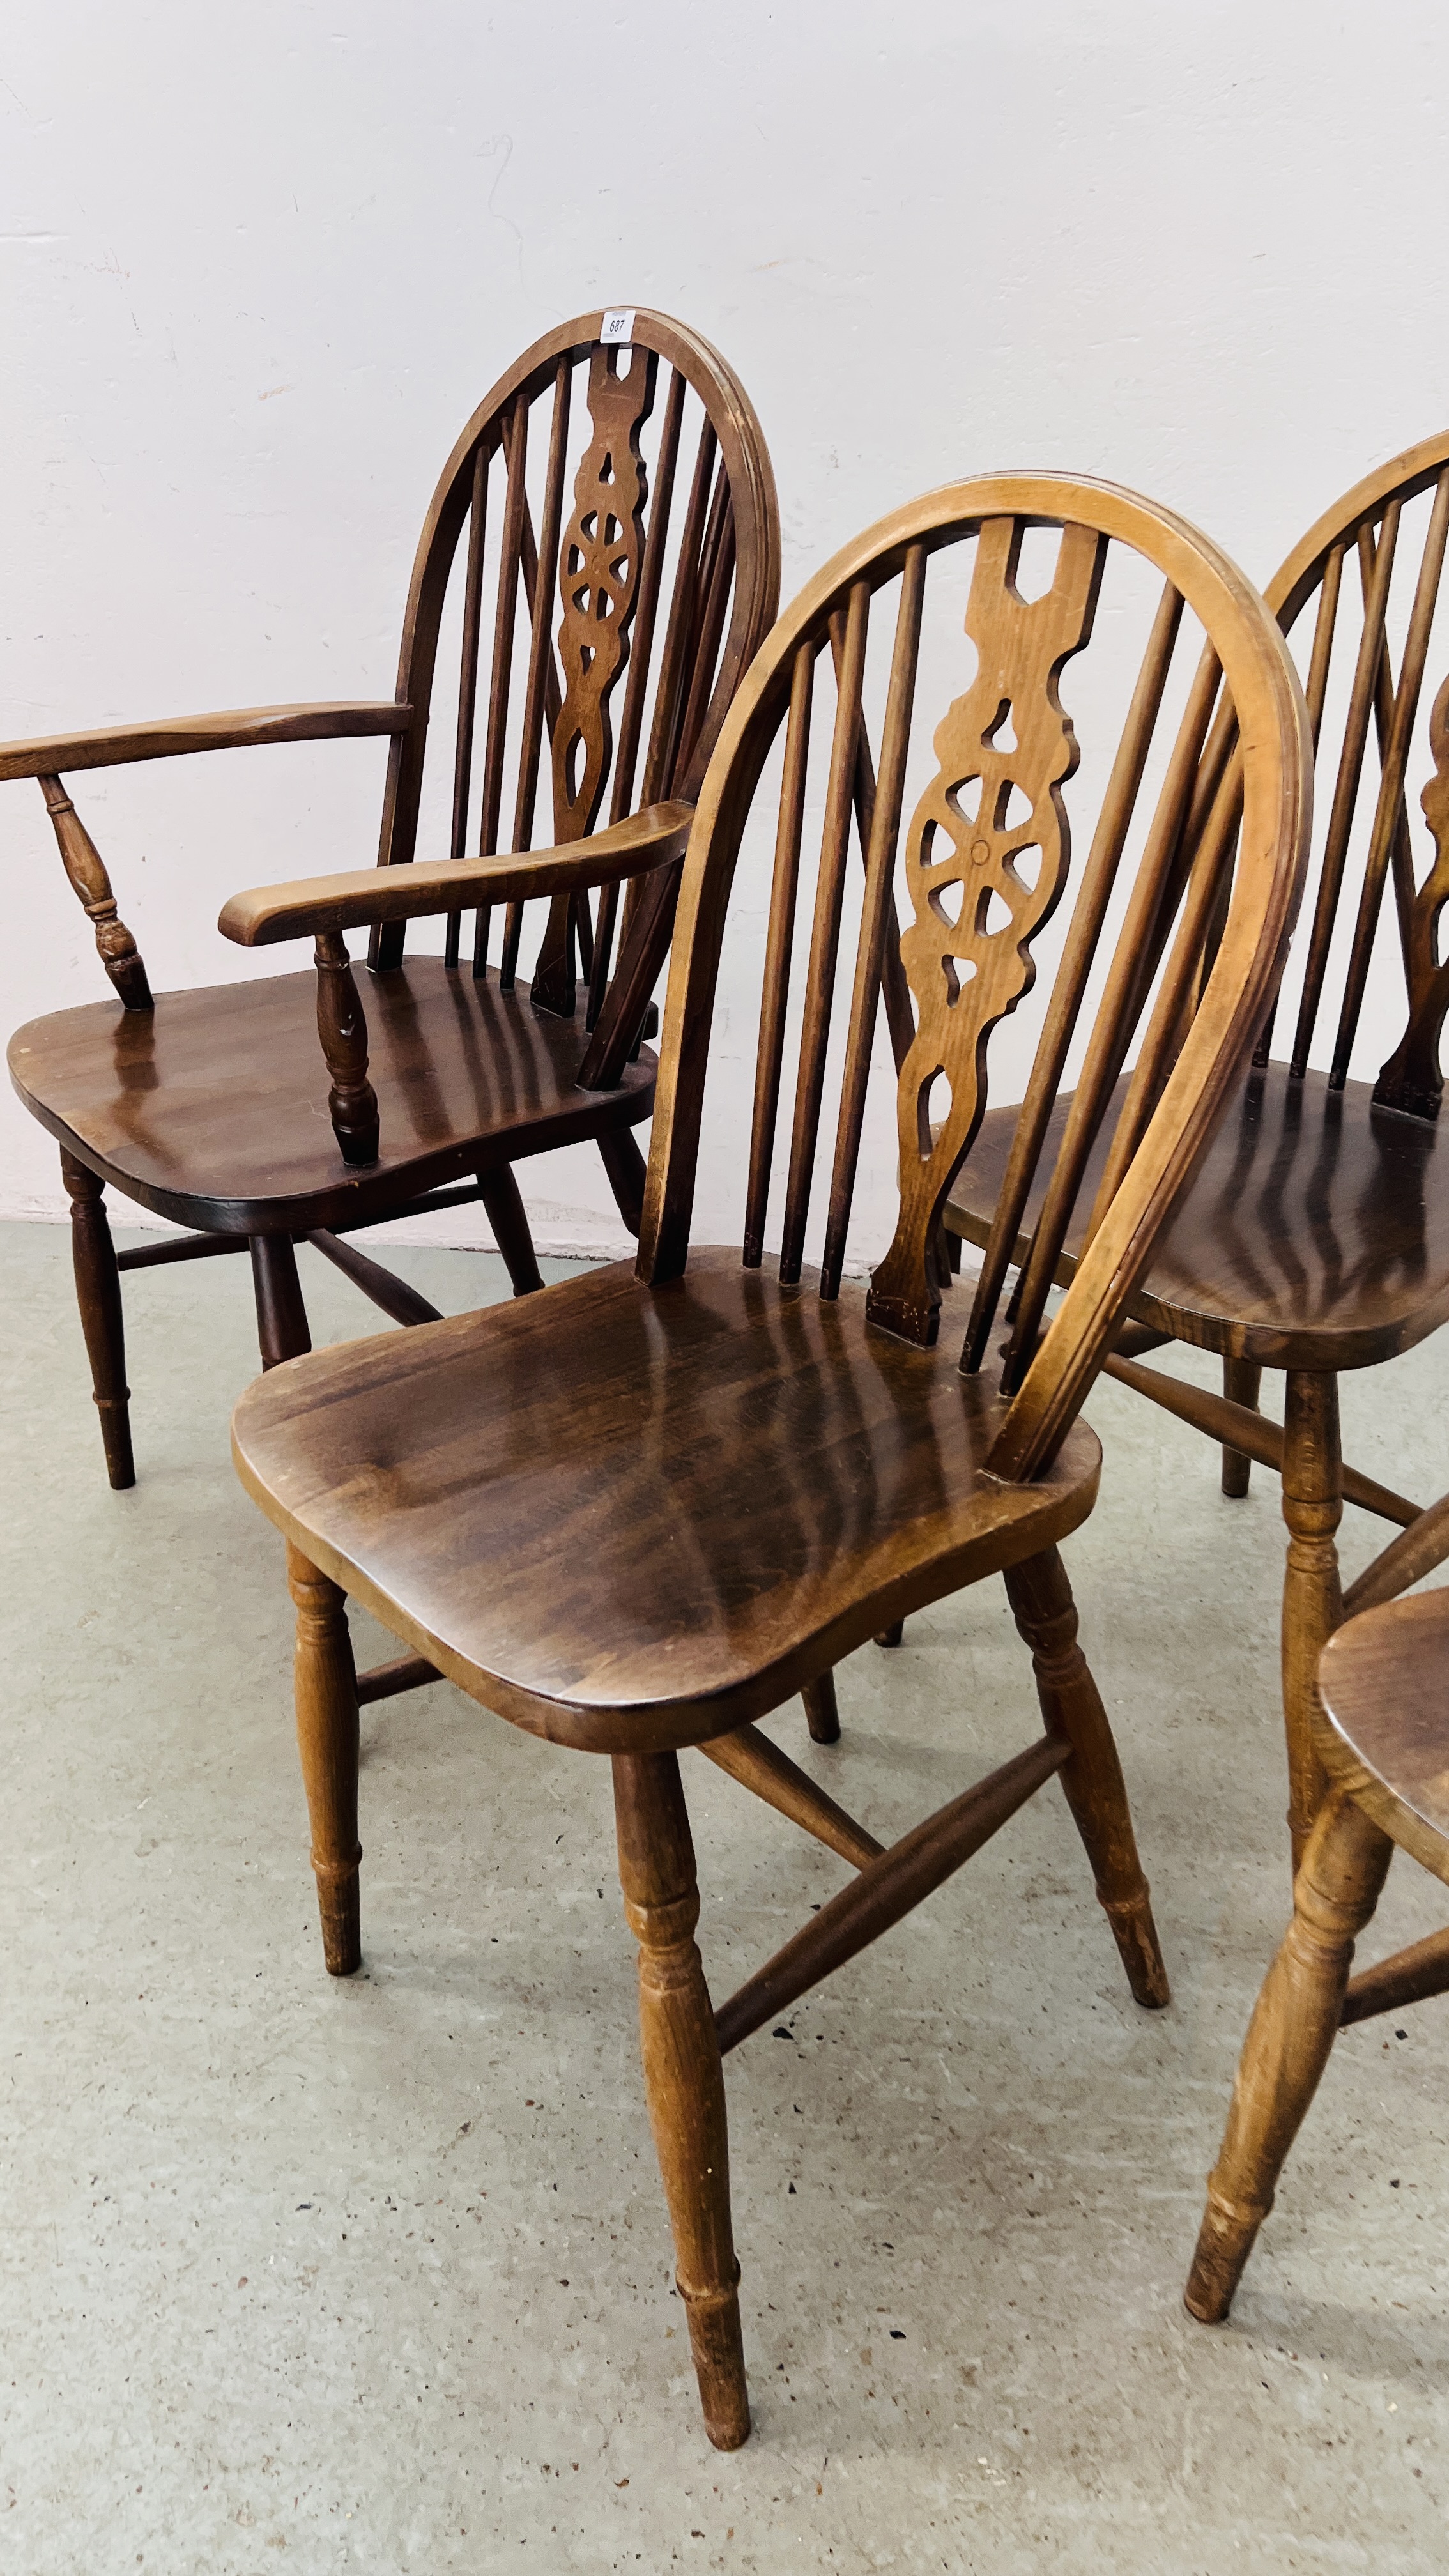 A GROUP OF 4 WHEEL BACK DINING CHAIRS INCLUDING 1 CARVER. - Image 4 of 8